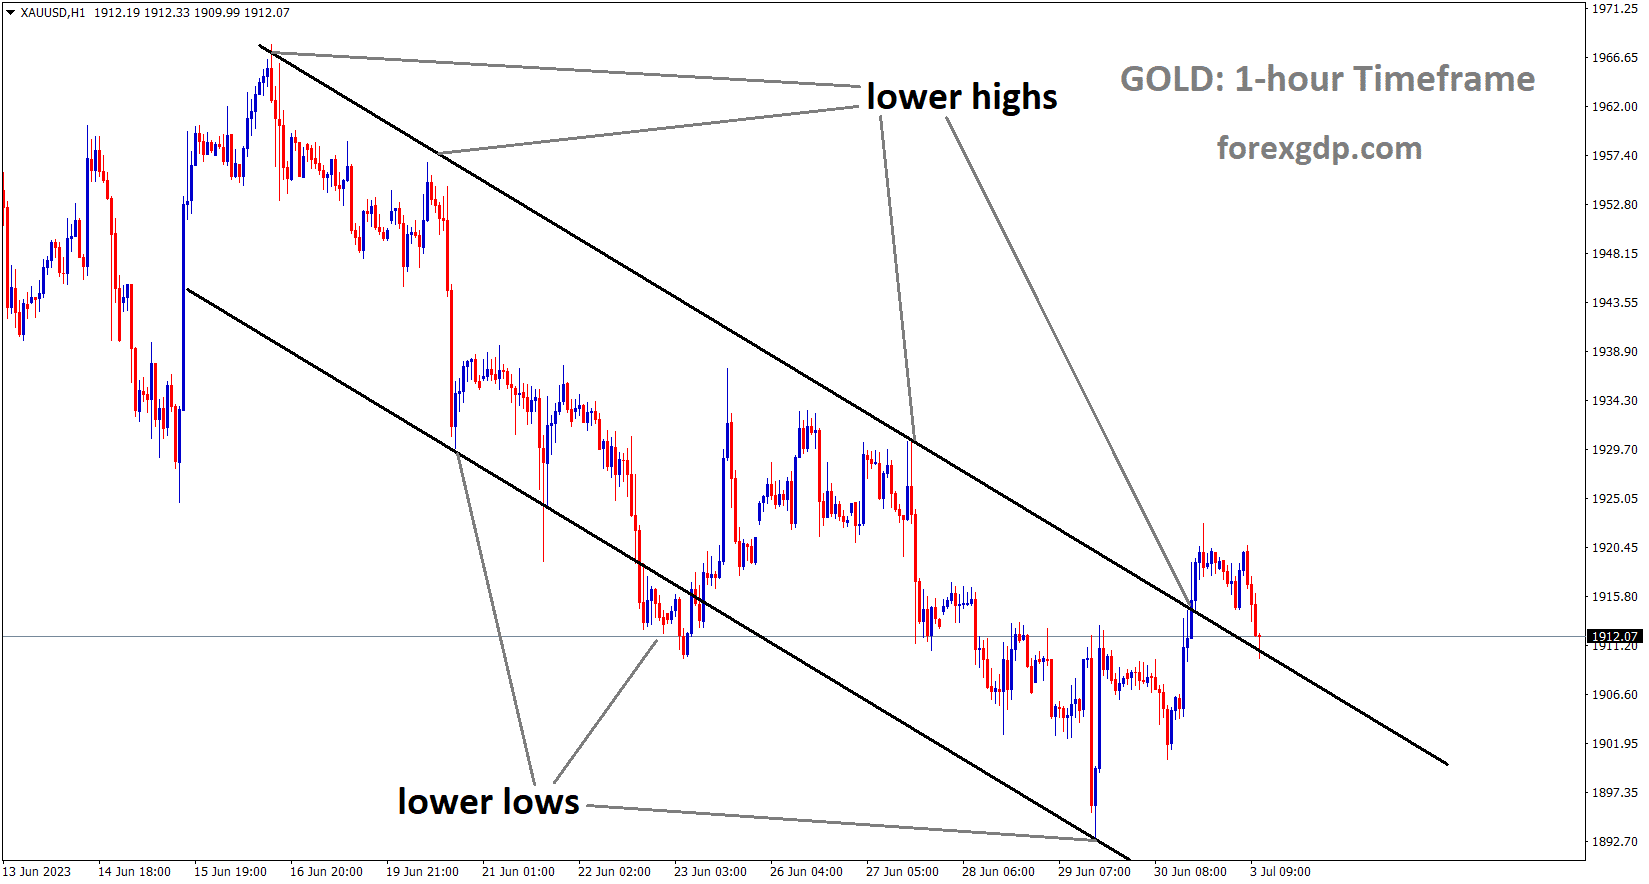 XAUUSD Gold Price is moving in the Descending channel and the market has fallen from the lower high area of the channel